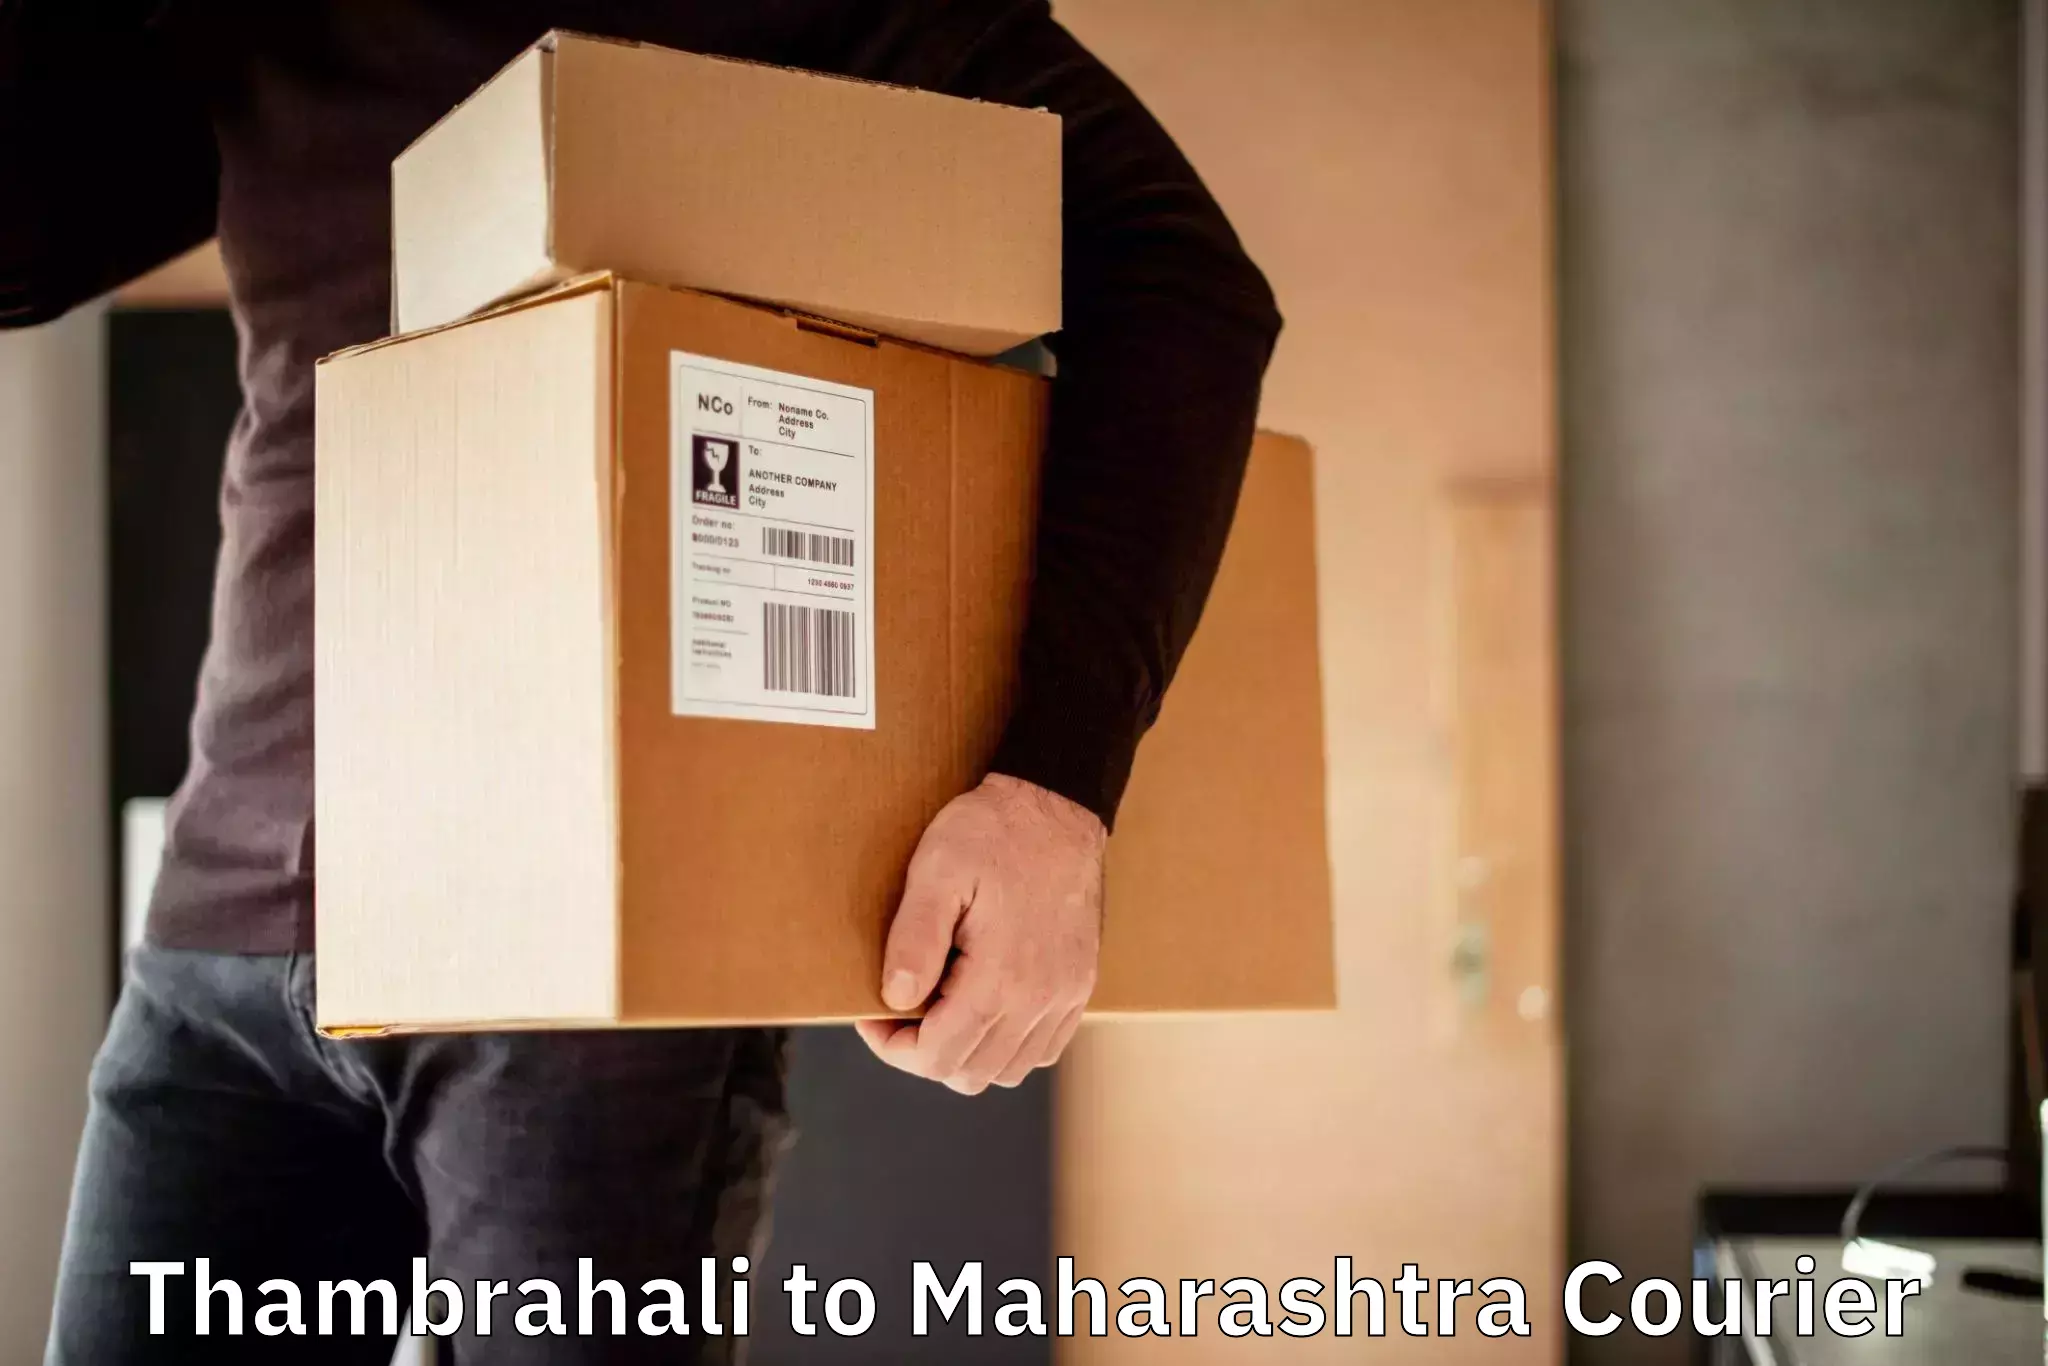 24-hour courier service Thambrahali to Panvel